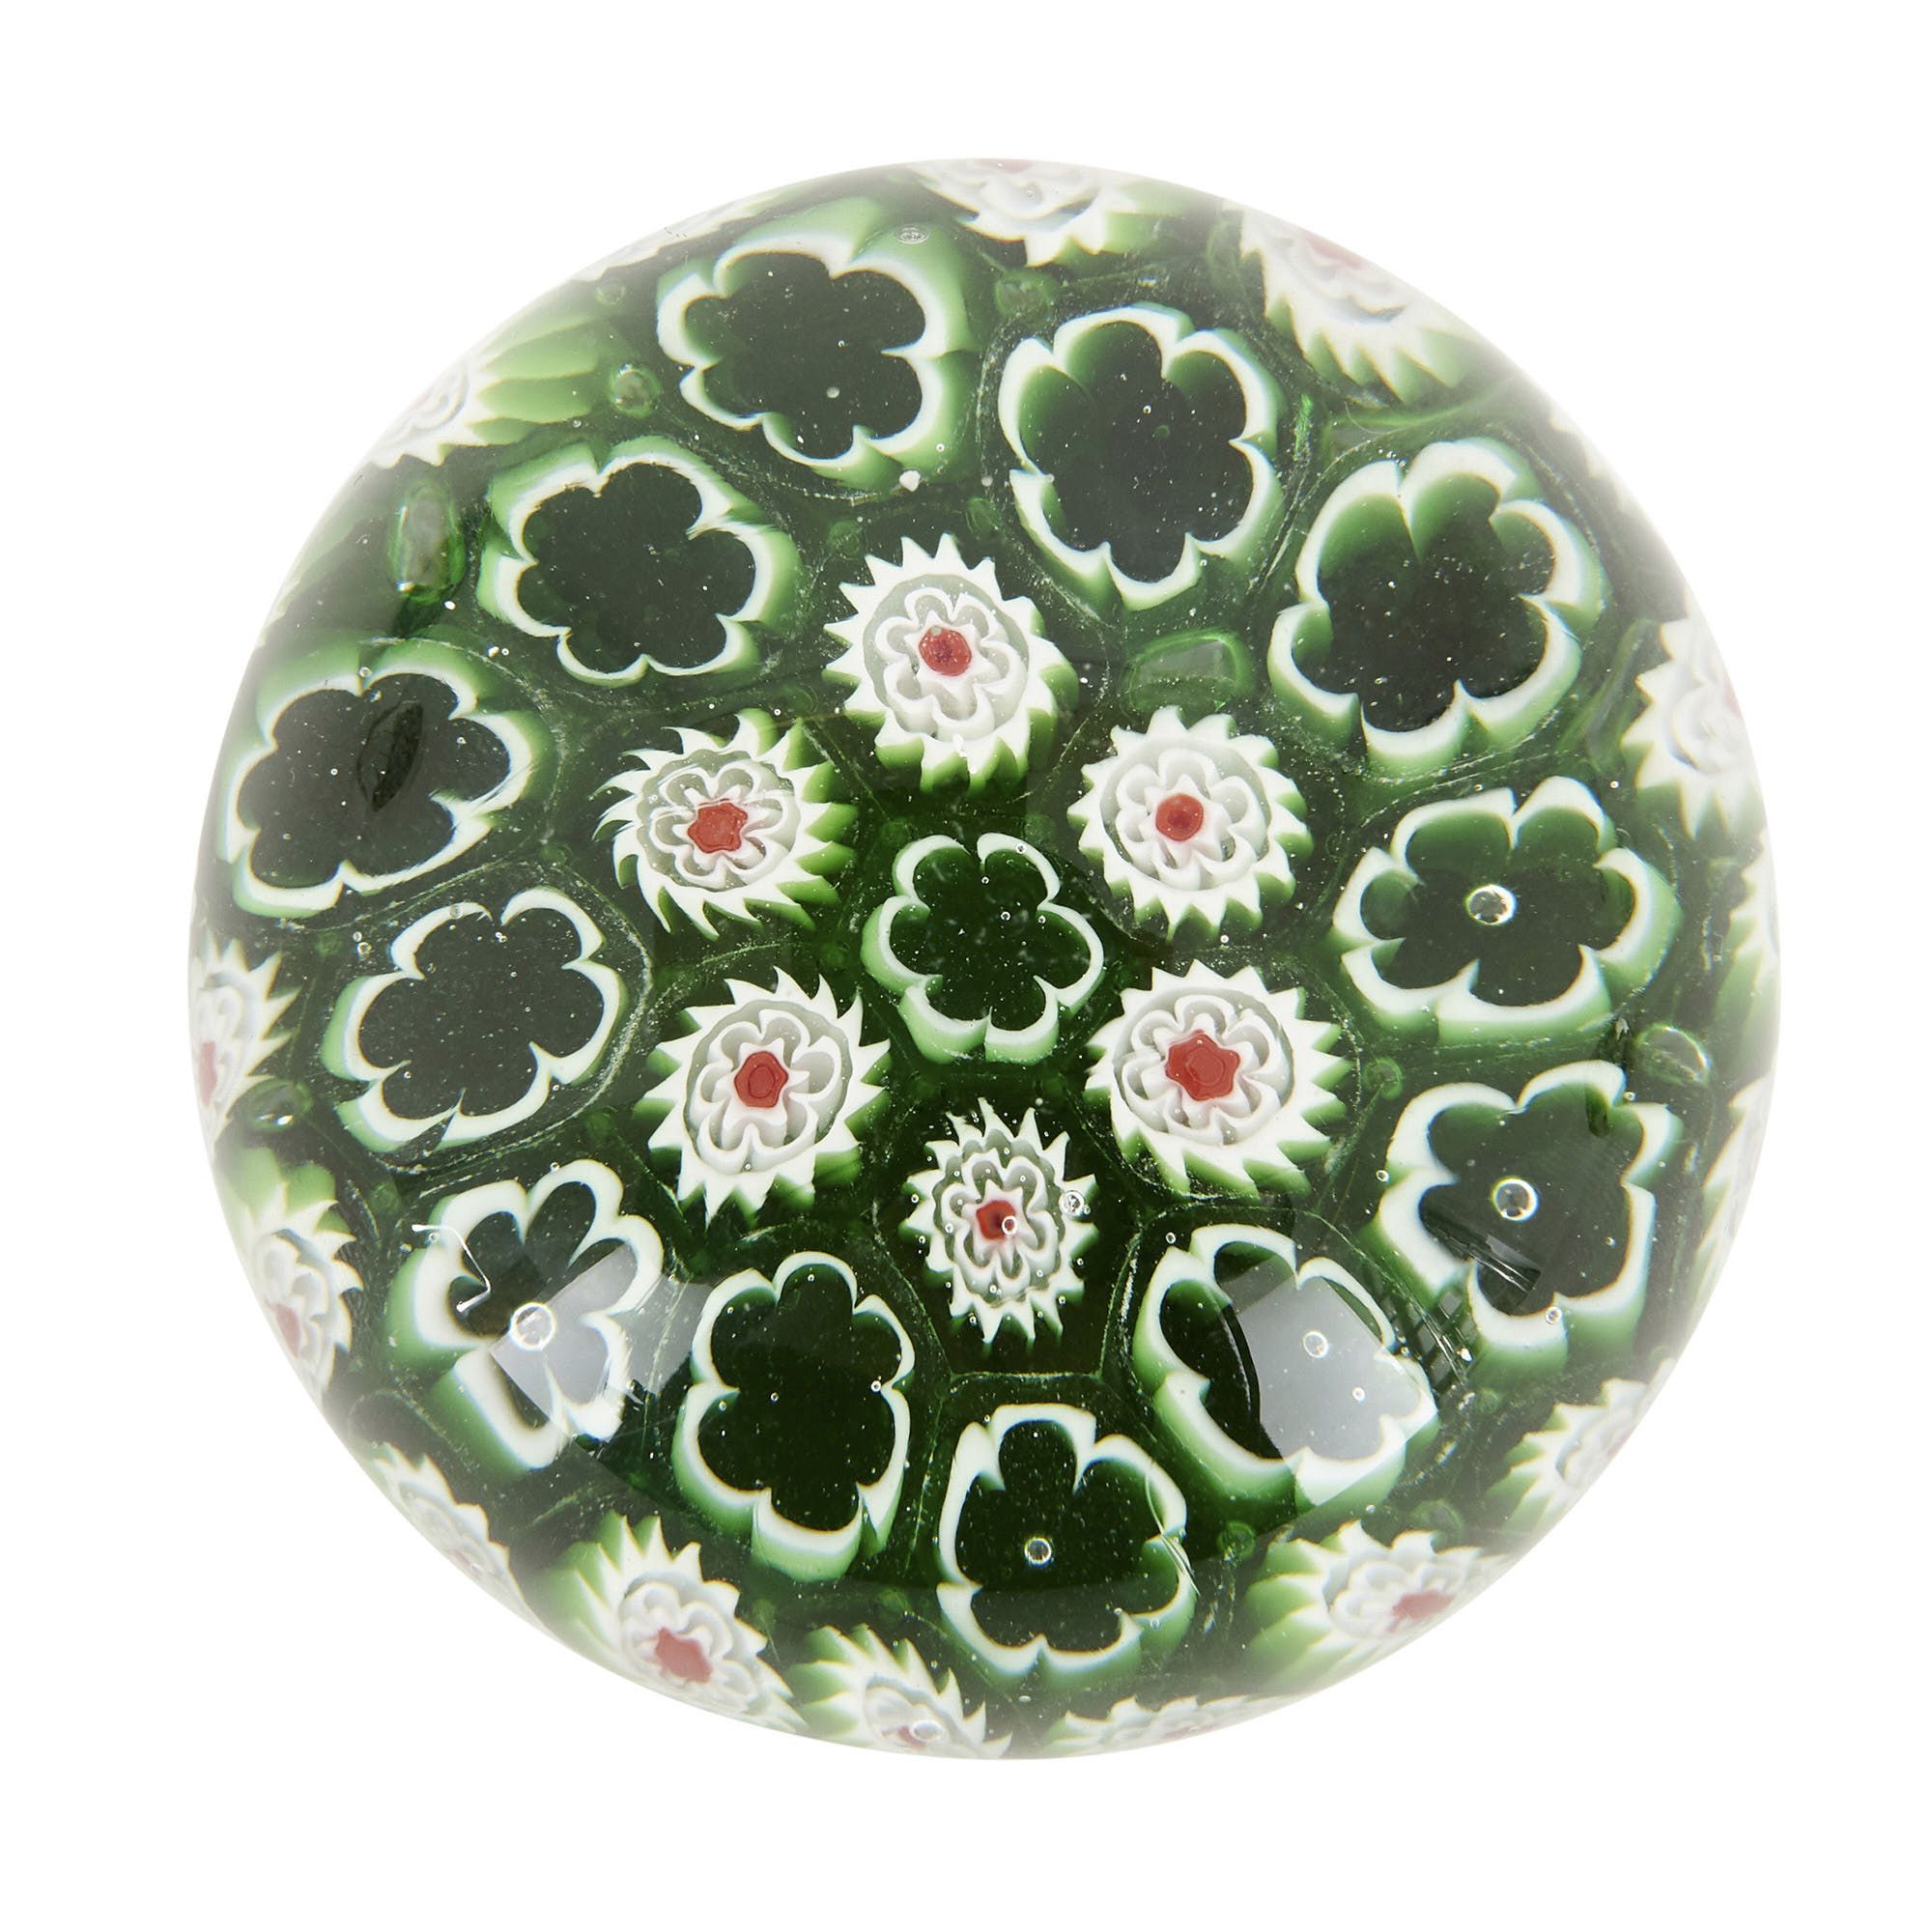 Set of six decorative glass desk paperweights | Mayfair Gallery